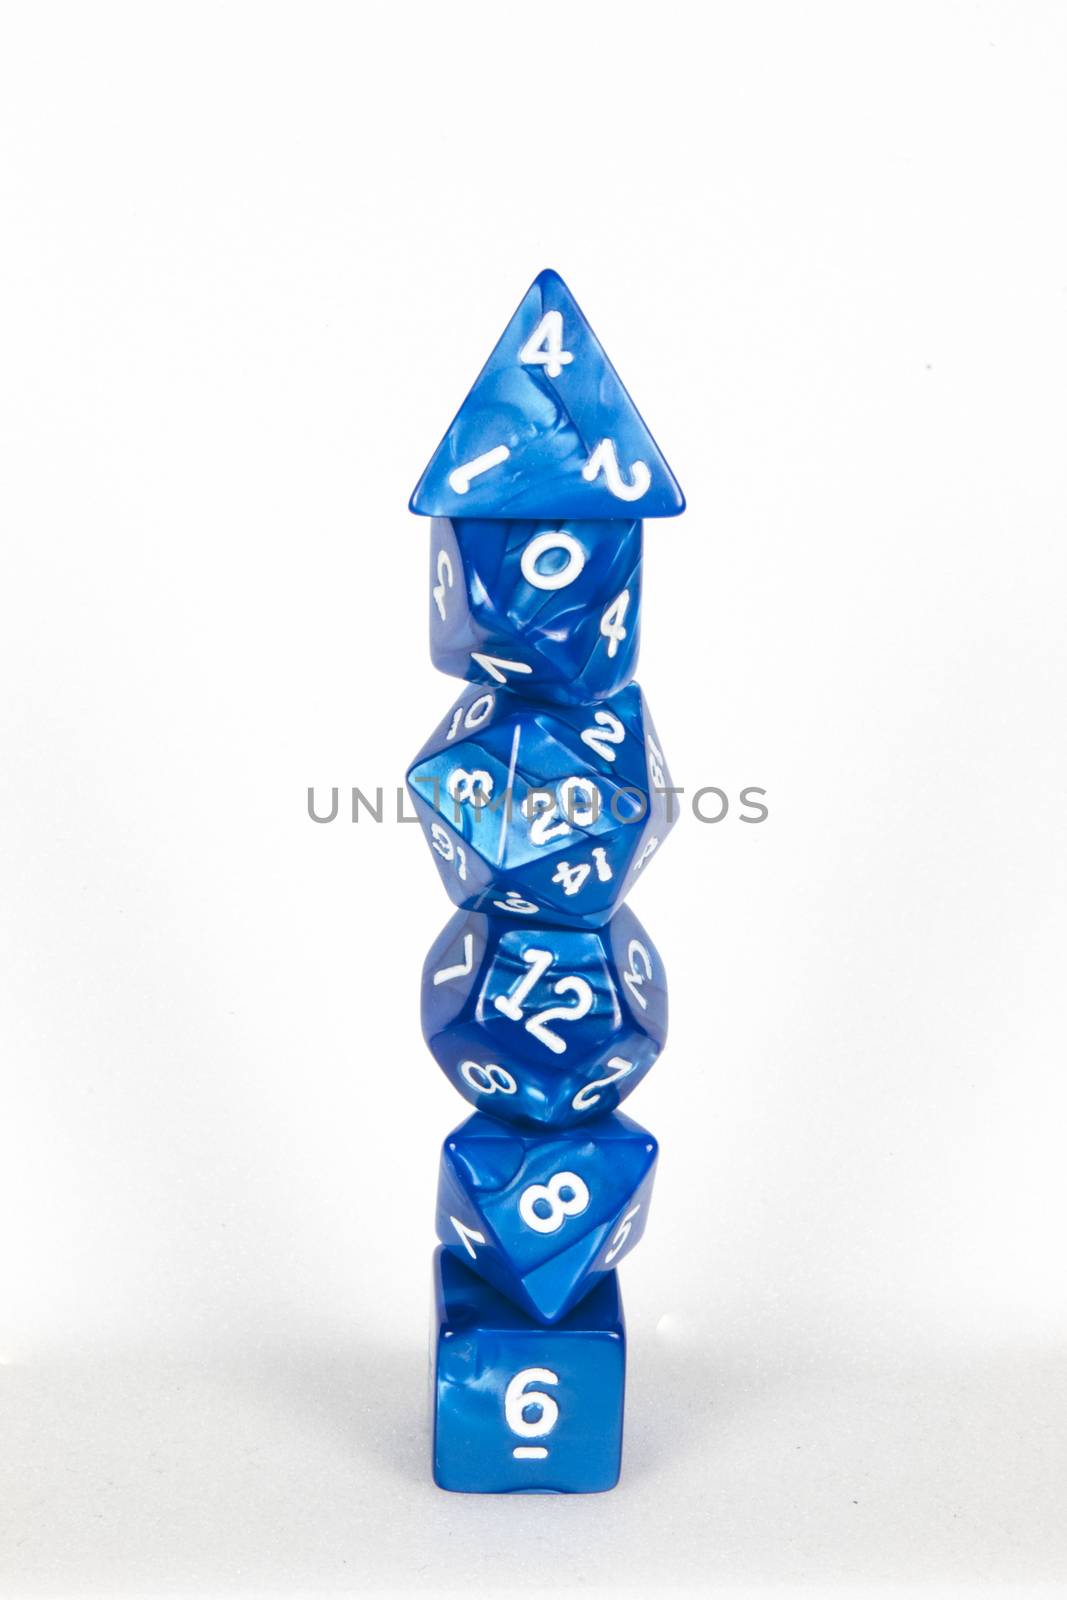 Poly dice tower blue and white by bluiten